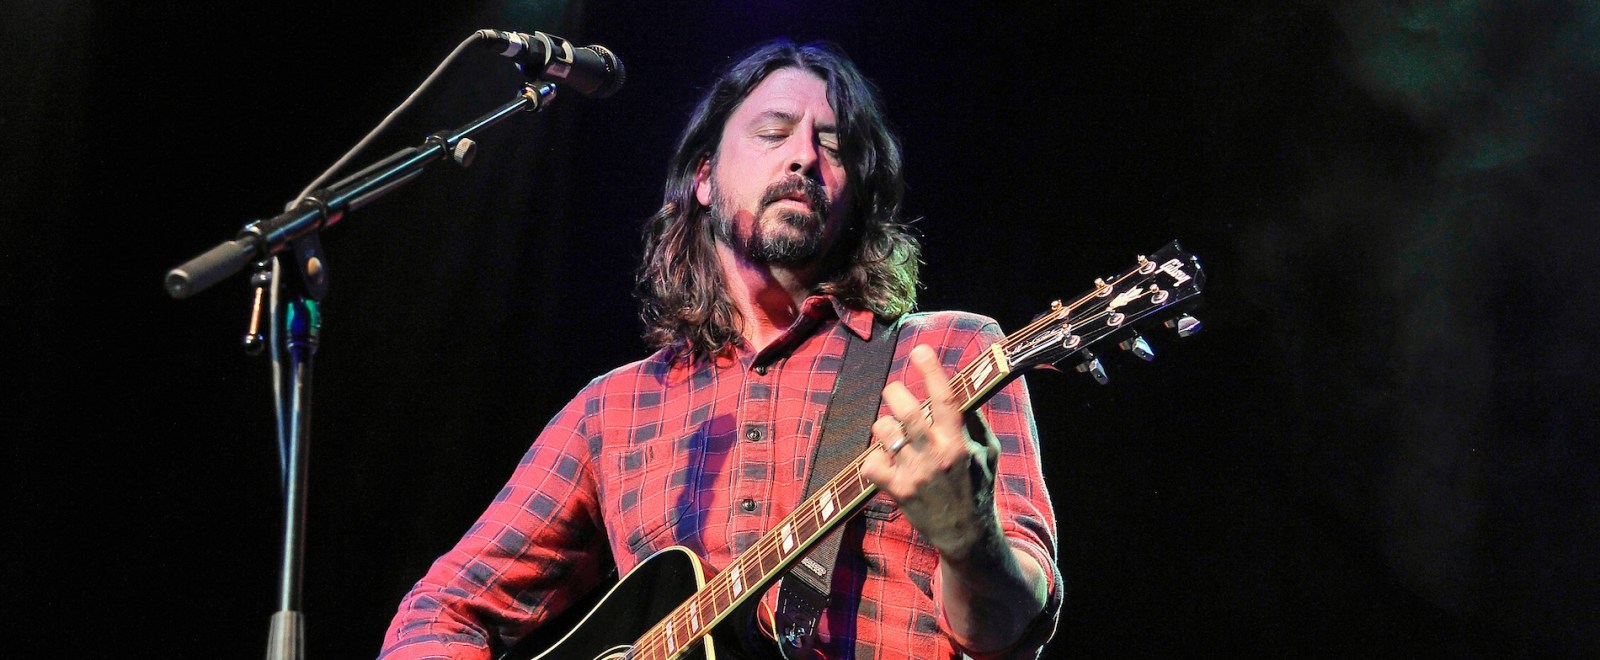 dave-grohl-foo-fighters-acoustic-guitar-getty-full.jpg